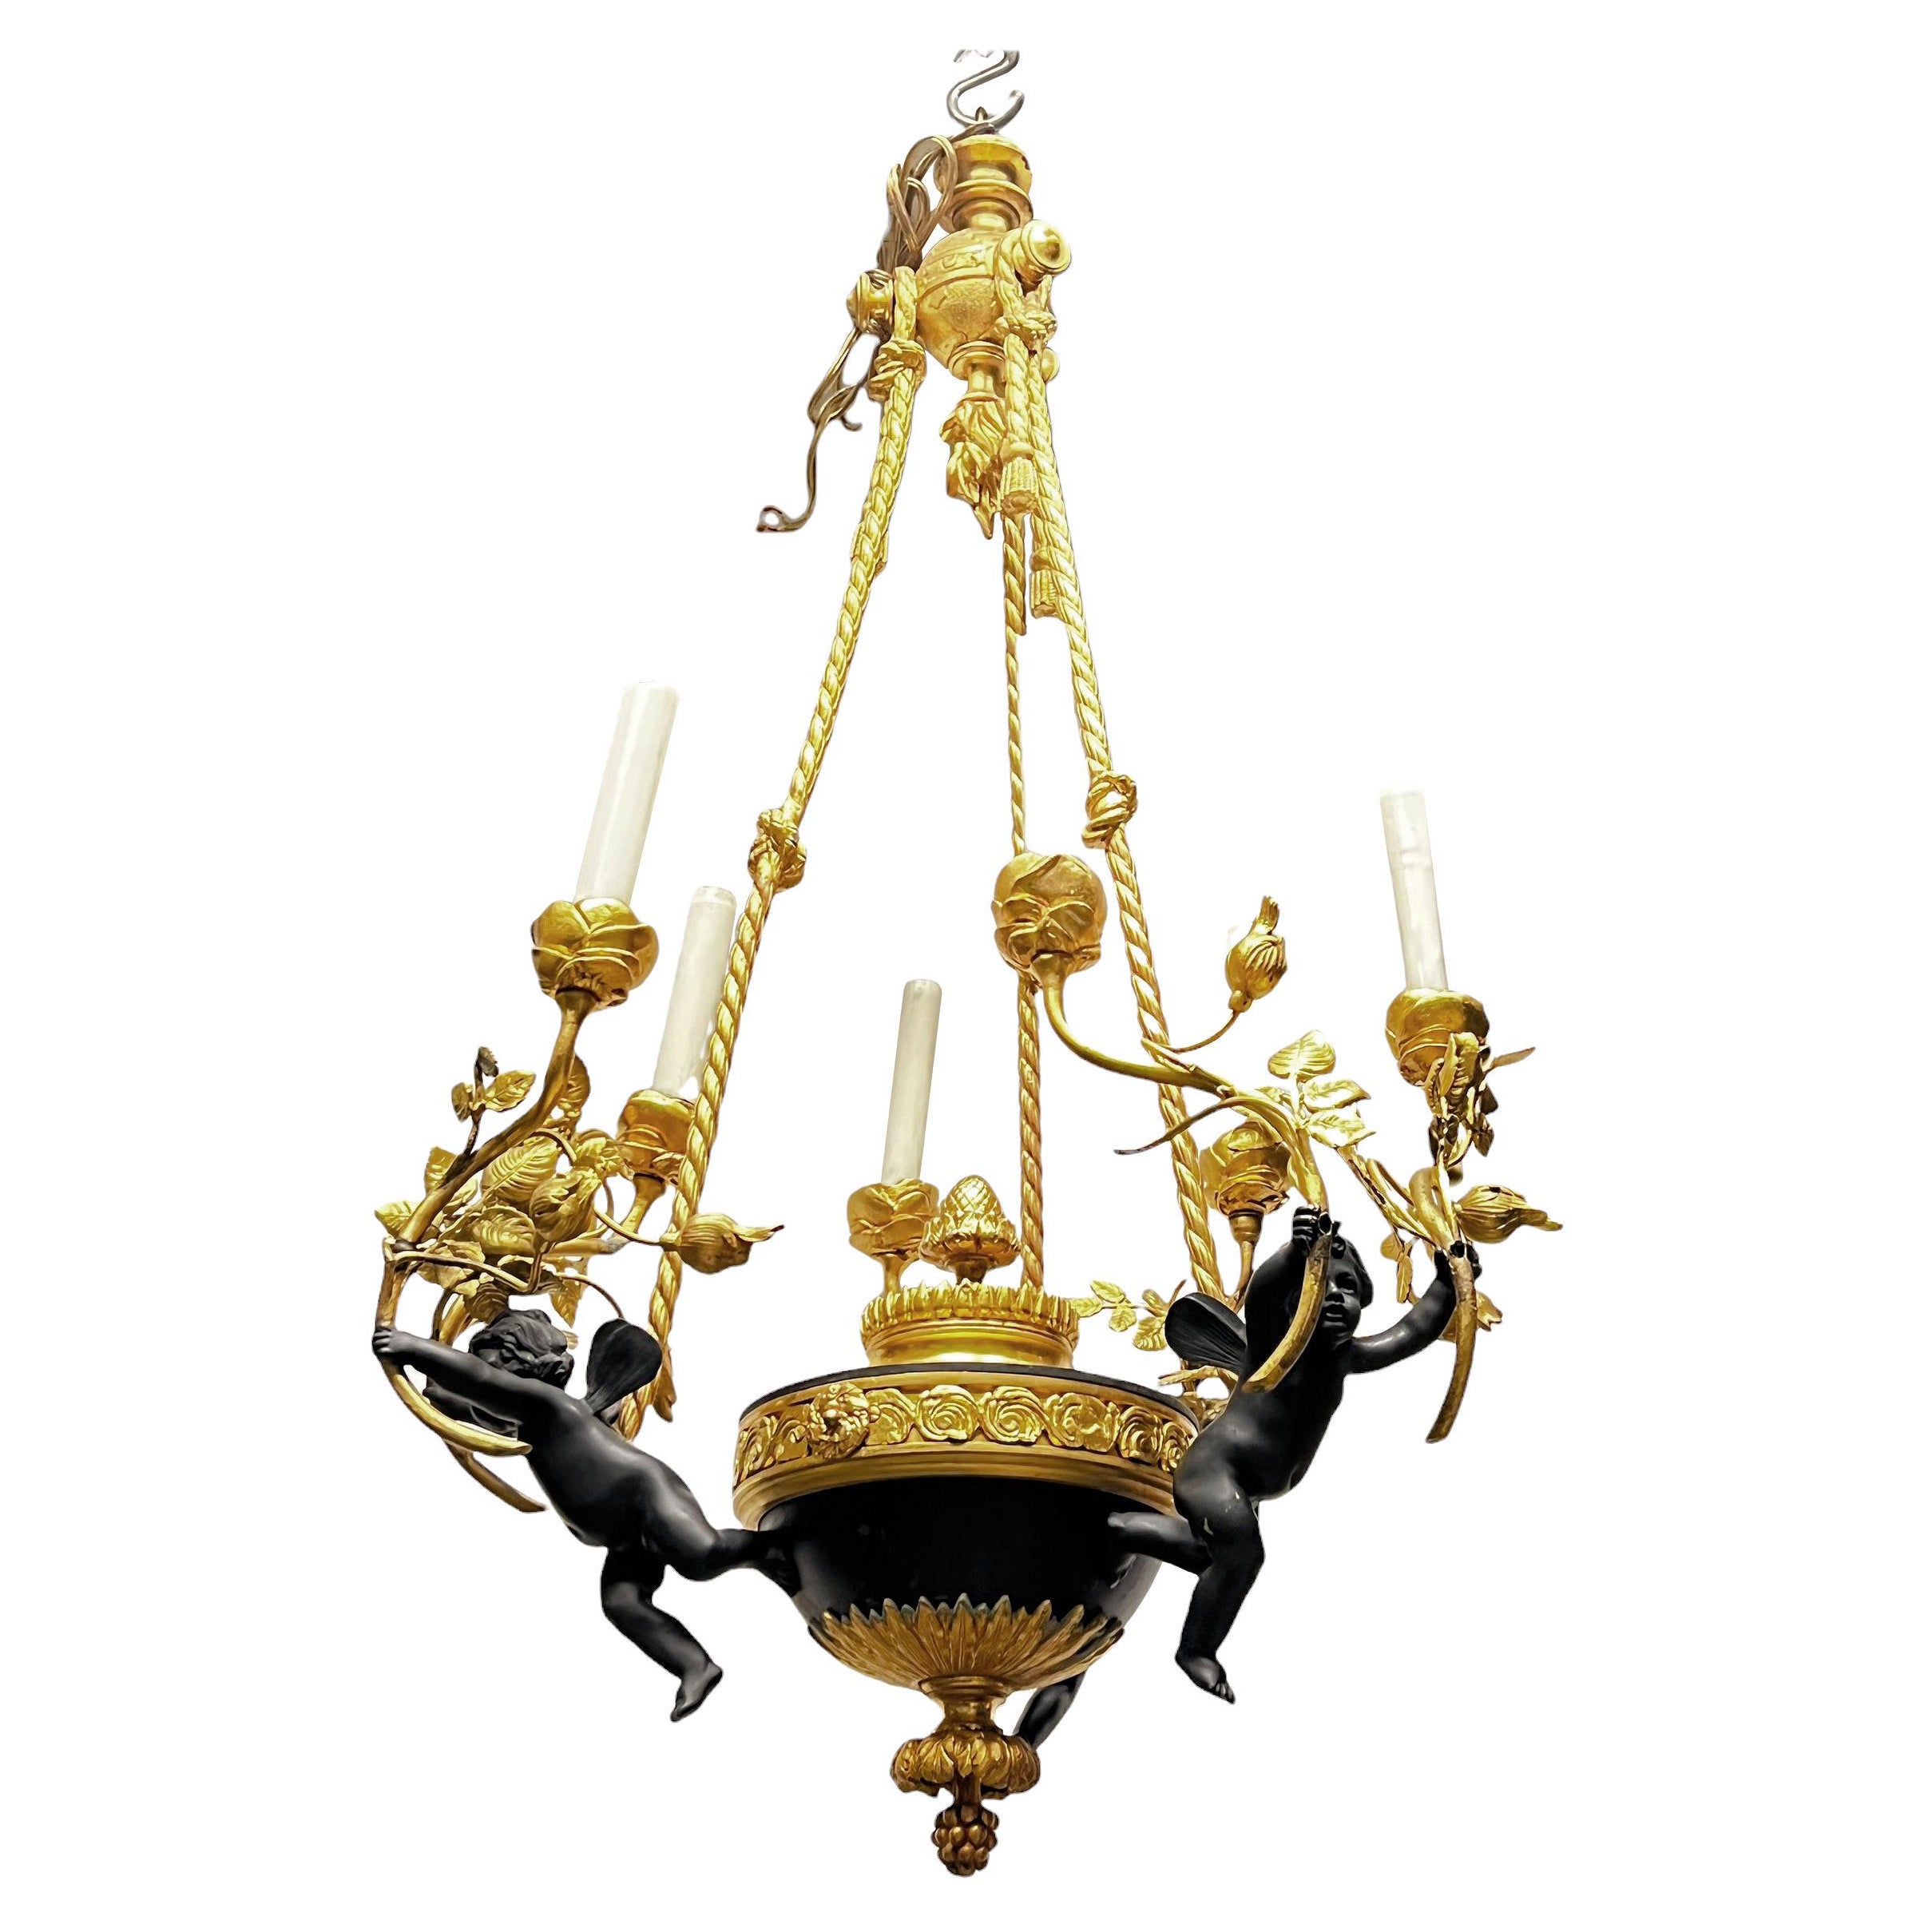 French Louis XVI Style Patinated Bronze Six-Light Putti Motif Chandelier